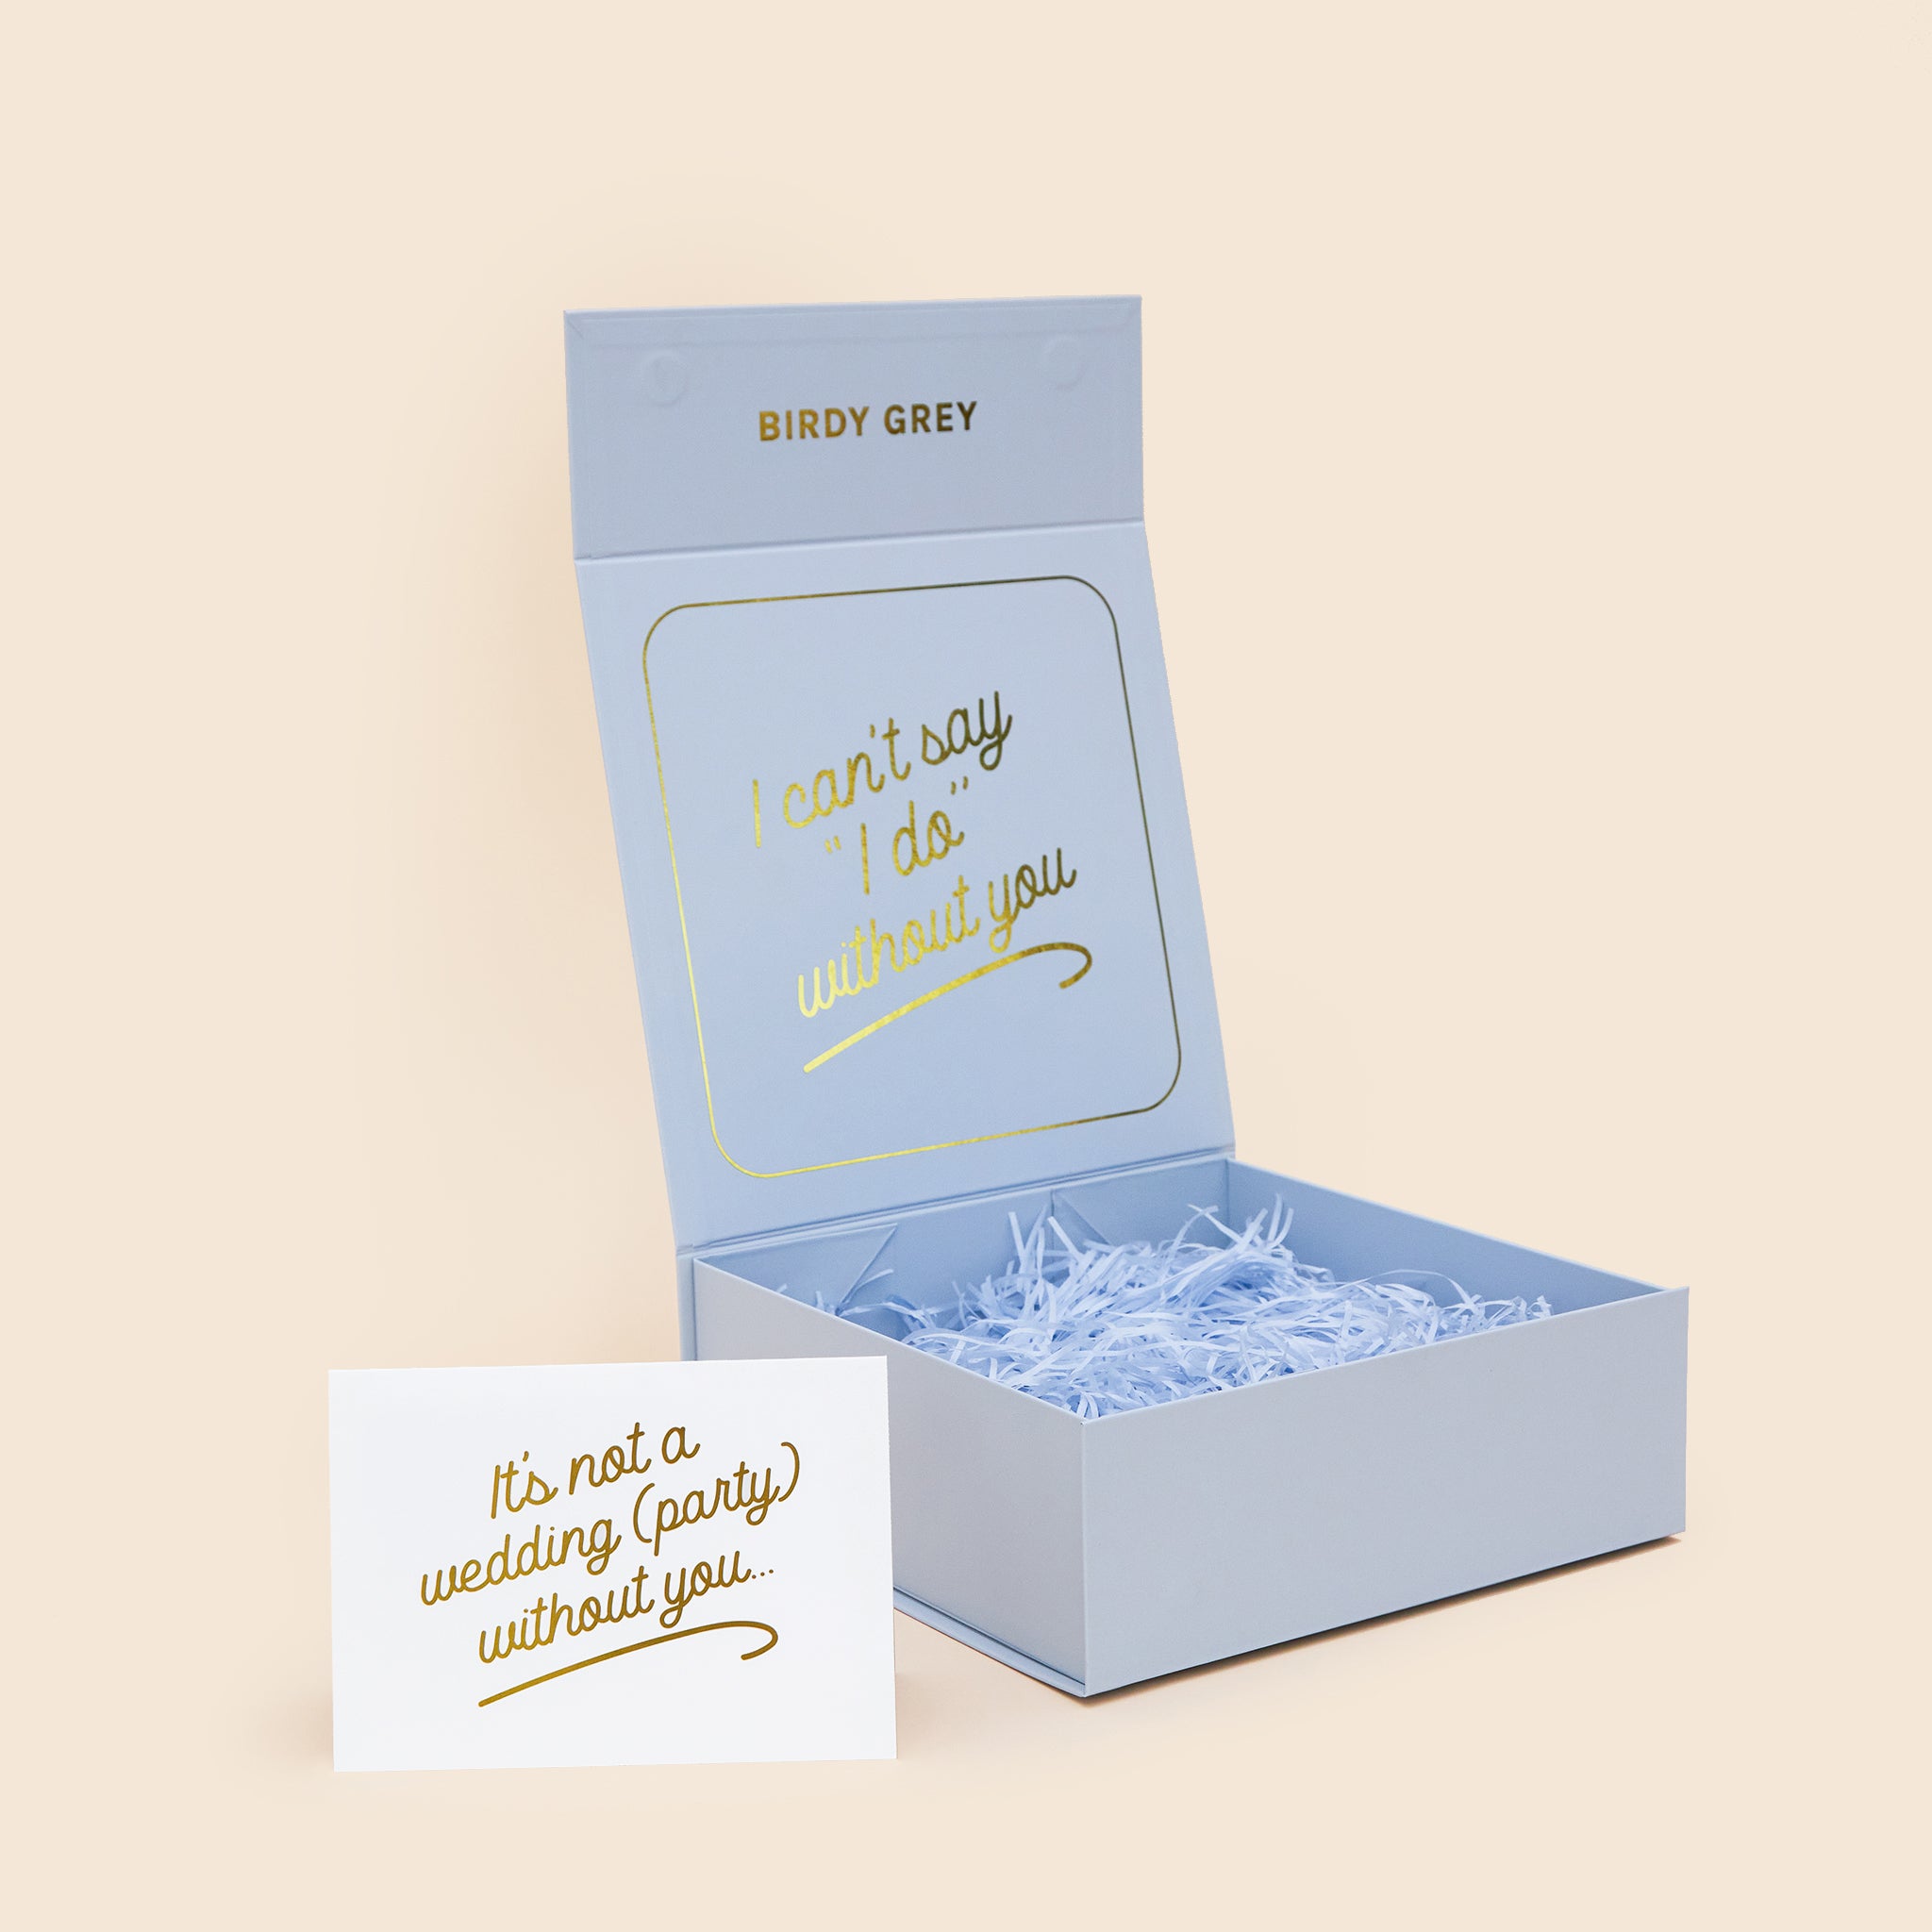 Personalized Proposal Box with card in Dusty Blue, front view